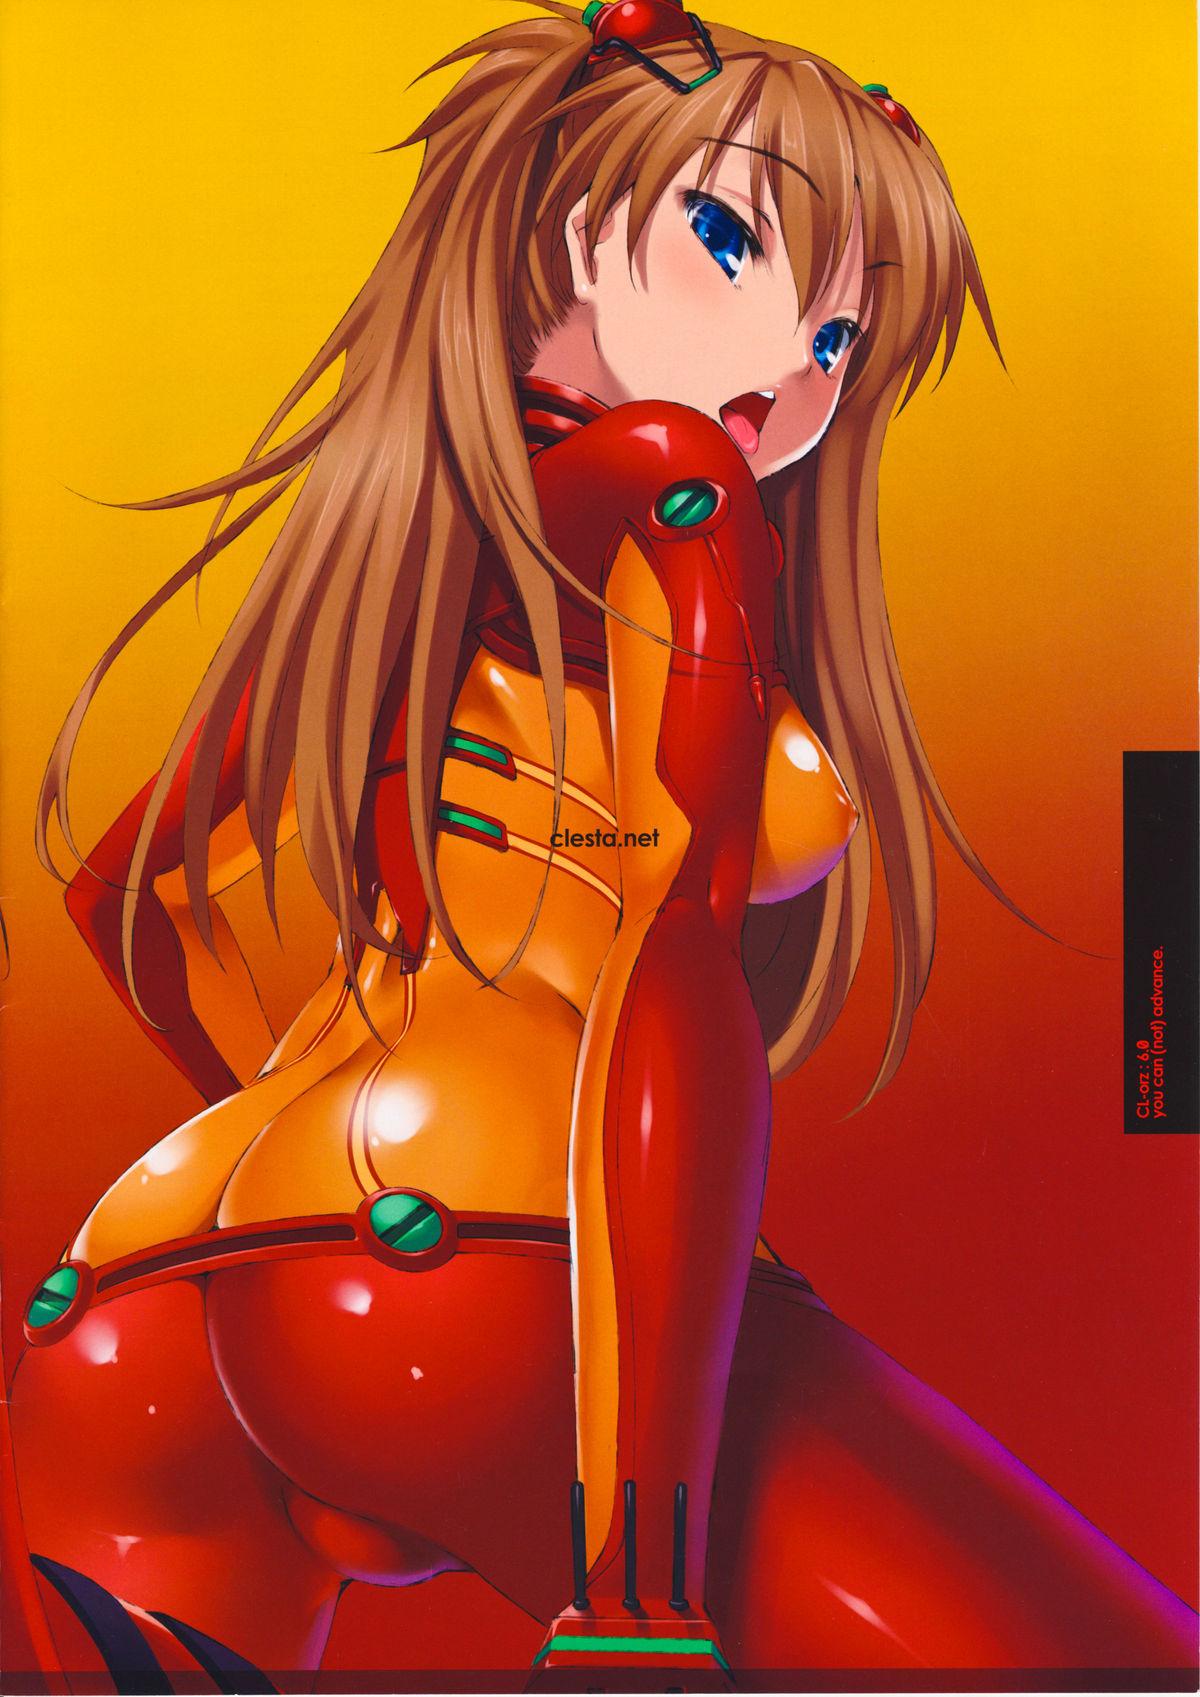 Tugging (C76) [Clesta (Cle Masahiro)] CL-orz 6.0 you can (not) advance. (Rebuild of Evangelion) [Decensored] - Neon genesis evangelion Camgirls - Page 16